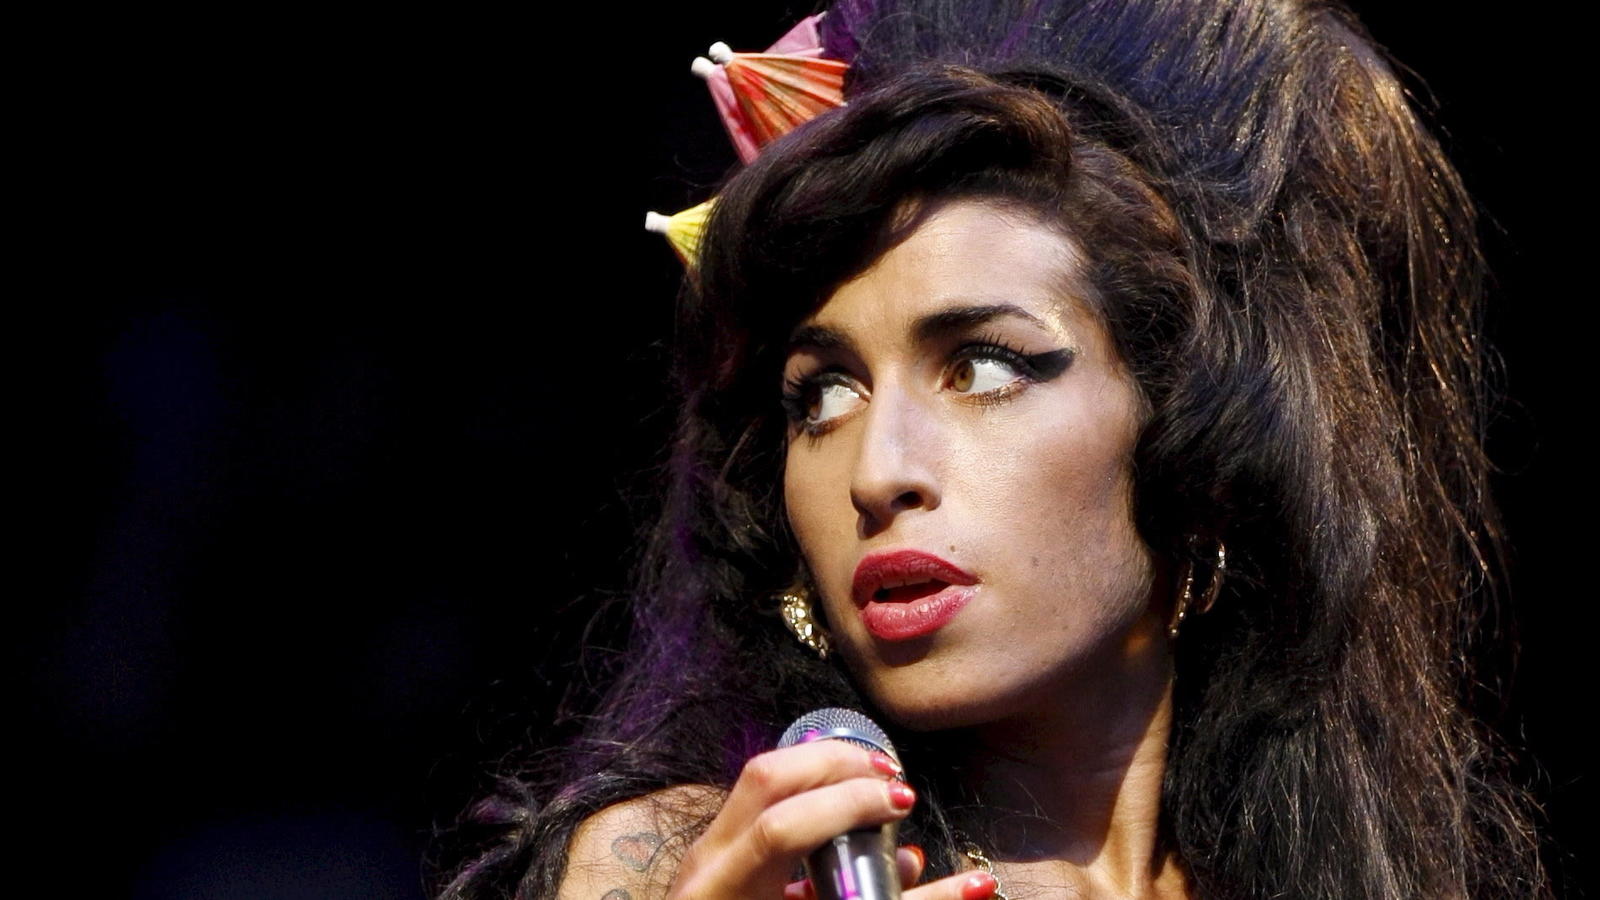 epa02980715 (FILES) A file photograph dated 28 June 2008 shows British singer Amy Winehouse on stage at the Glastonbury Festival in Somerset, Britain. The inquest into the death of the singer is due to singer is due to start in London on 26 October 2